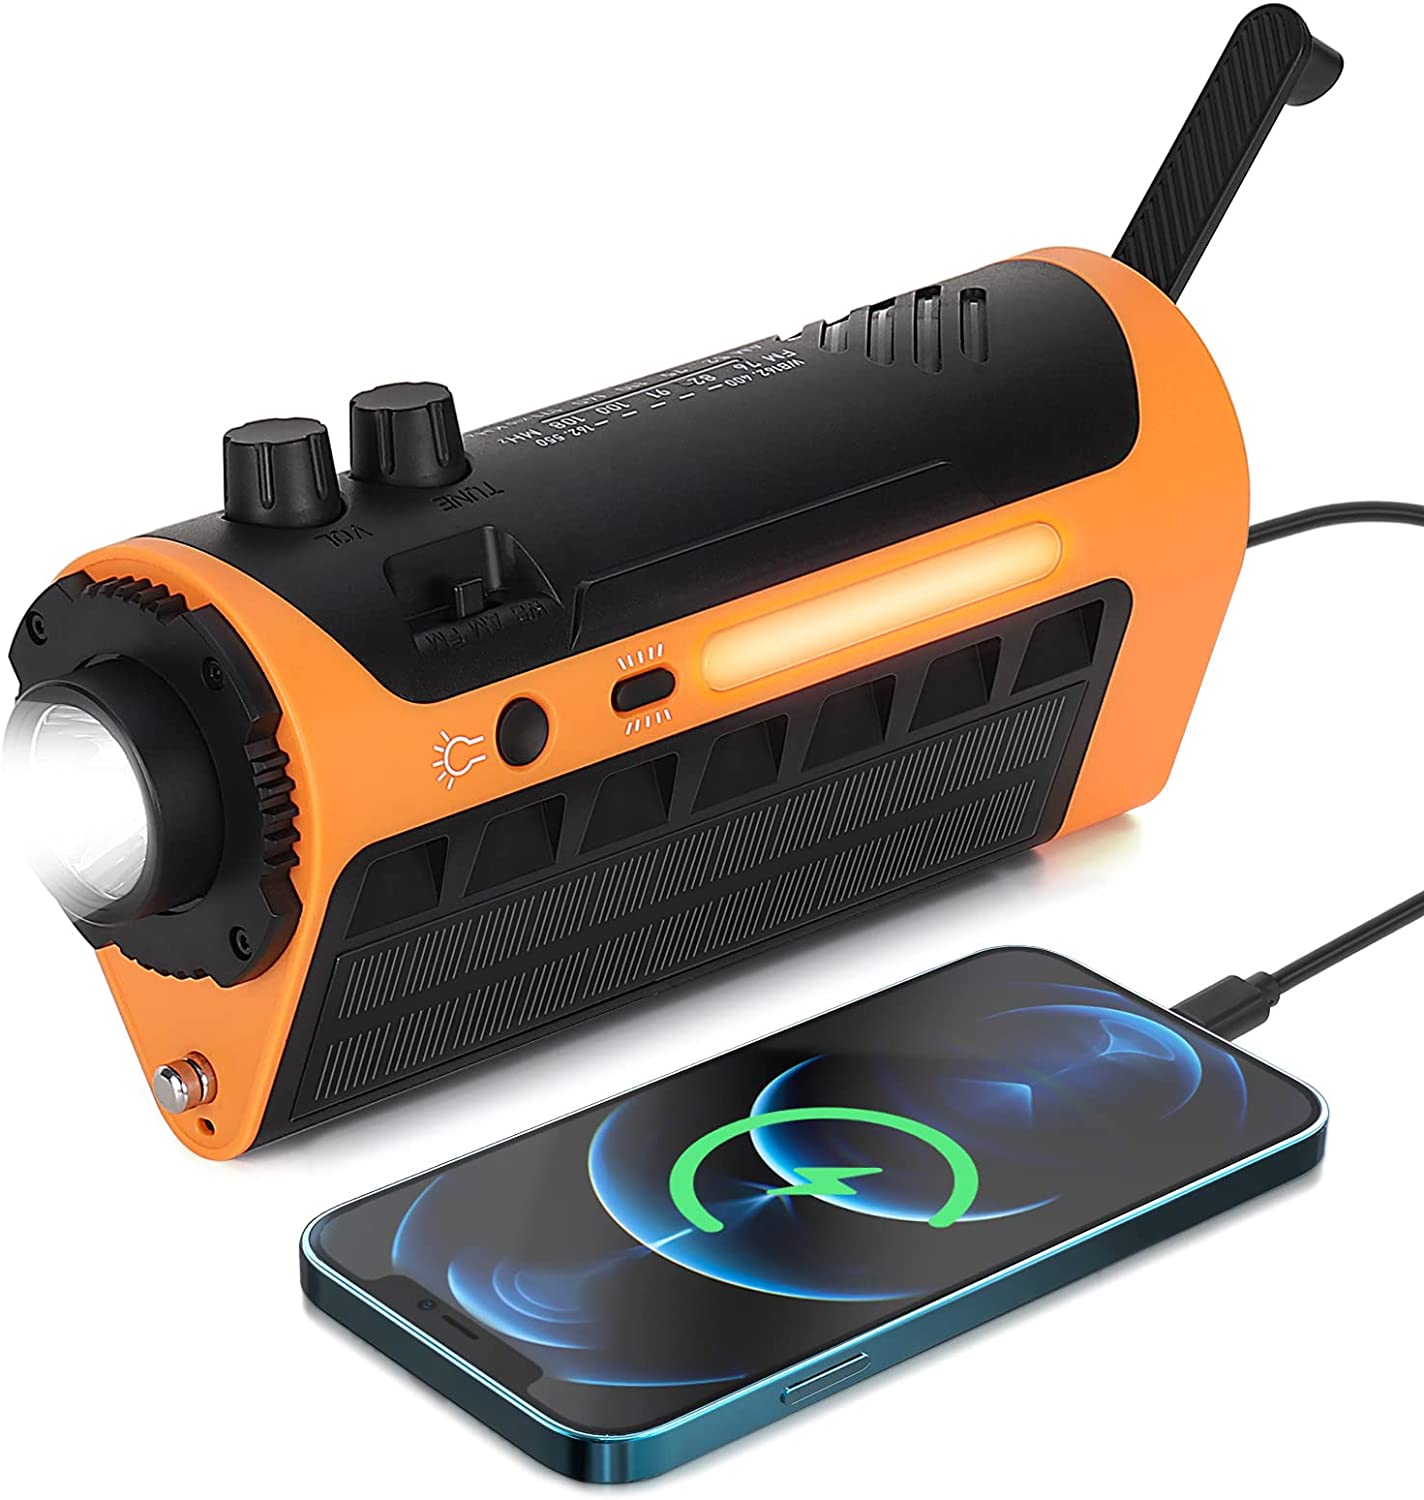 ZWOOS Solar Emergency Radio with Automatic Weather Alert, NOAA Radio with Cell Phone Charger, Hand Crank Radio with 4000 mAh Battery for Camping, Outdoor Survival